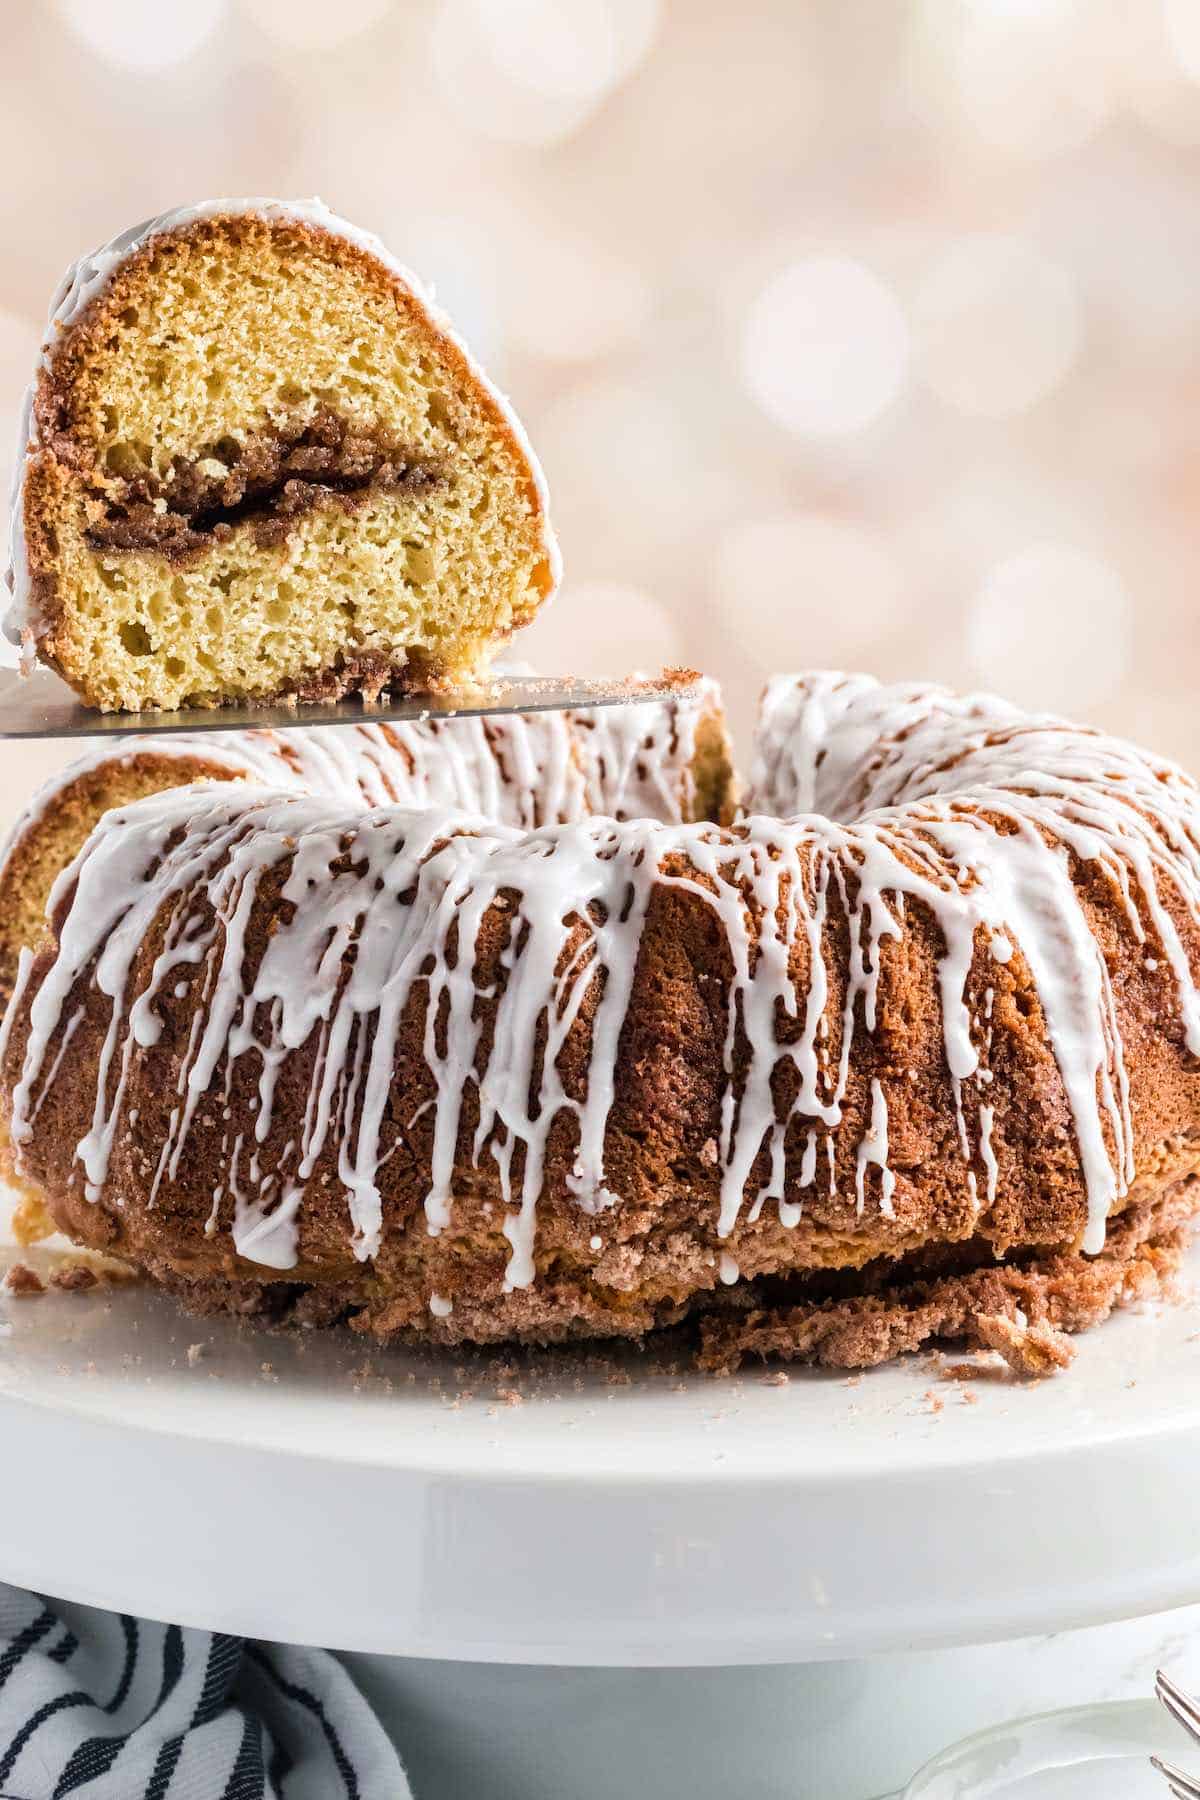 Sour cream bundt cake with a wedge cut out showing a cinnamon brown sugar filling.